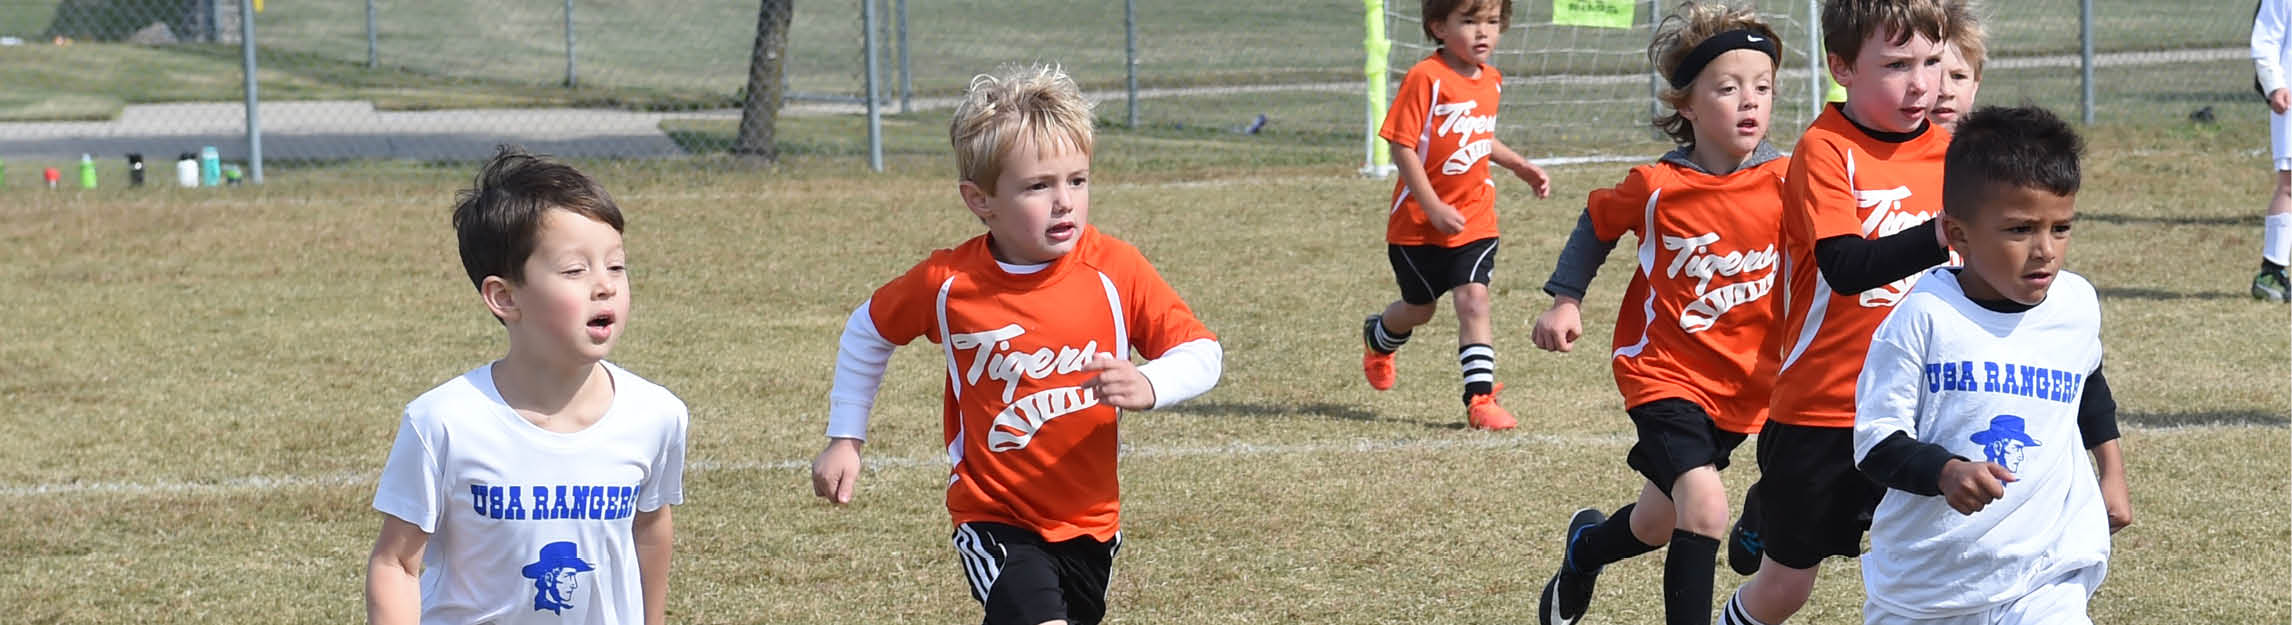 Male soccer players in white and orange jerseys running down the field